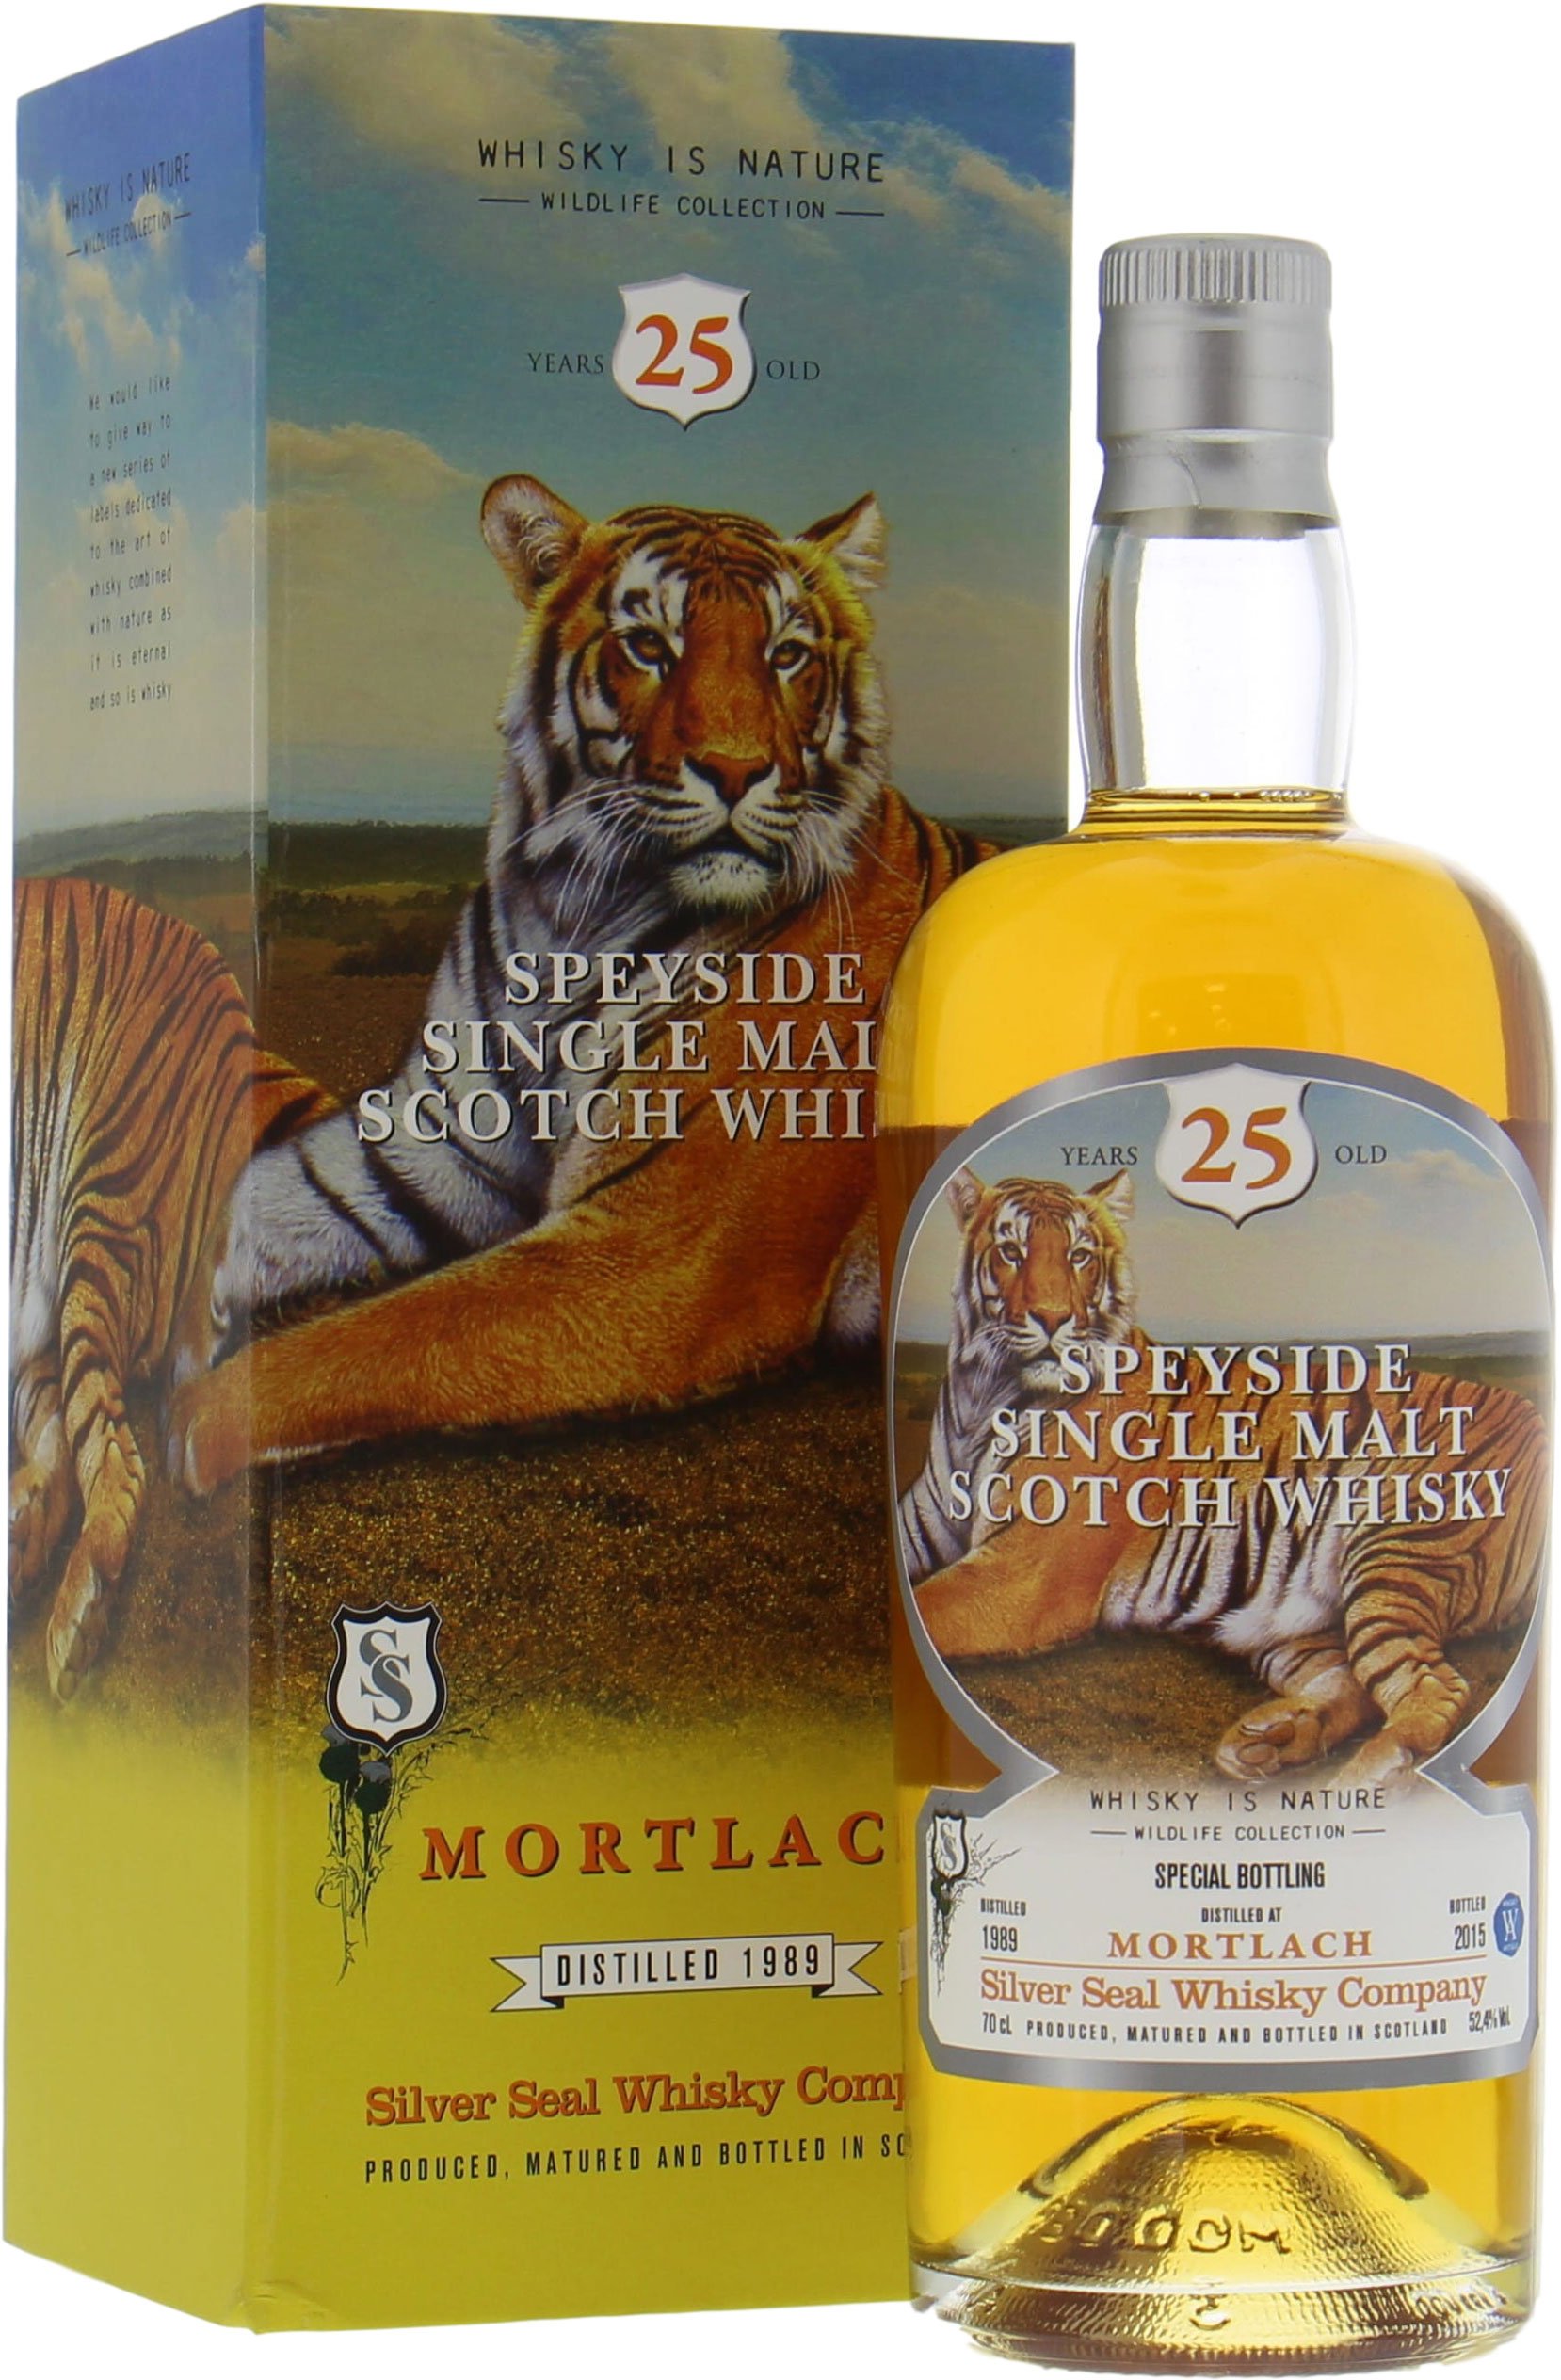 Mortlach - 25 Years Old Silver Seal Wildlife Collection Cask 3911 52.4% 1989